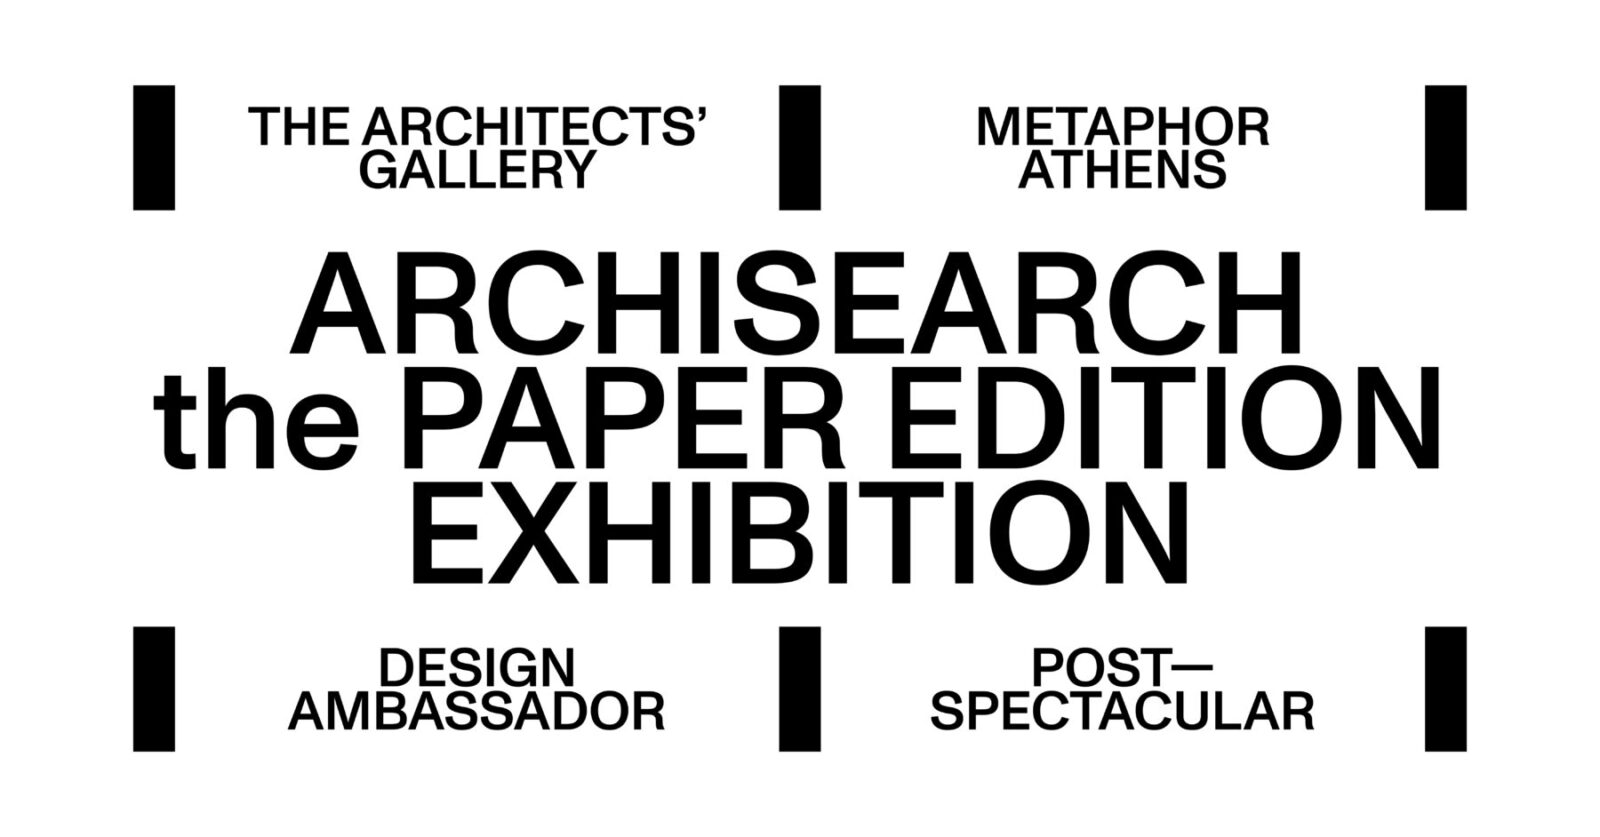 Archisearch Archisearch the Paper Edition - Exhibition The Architects’ Gallery X Metaphor Athens Design Ambassador X Post-Spectacular Office